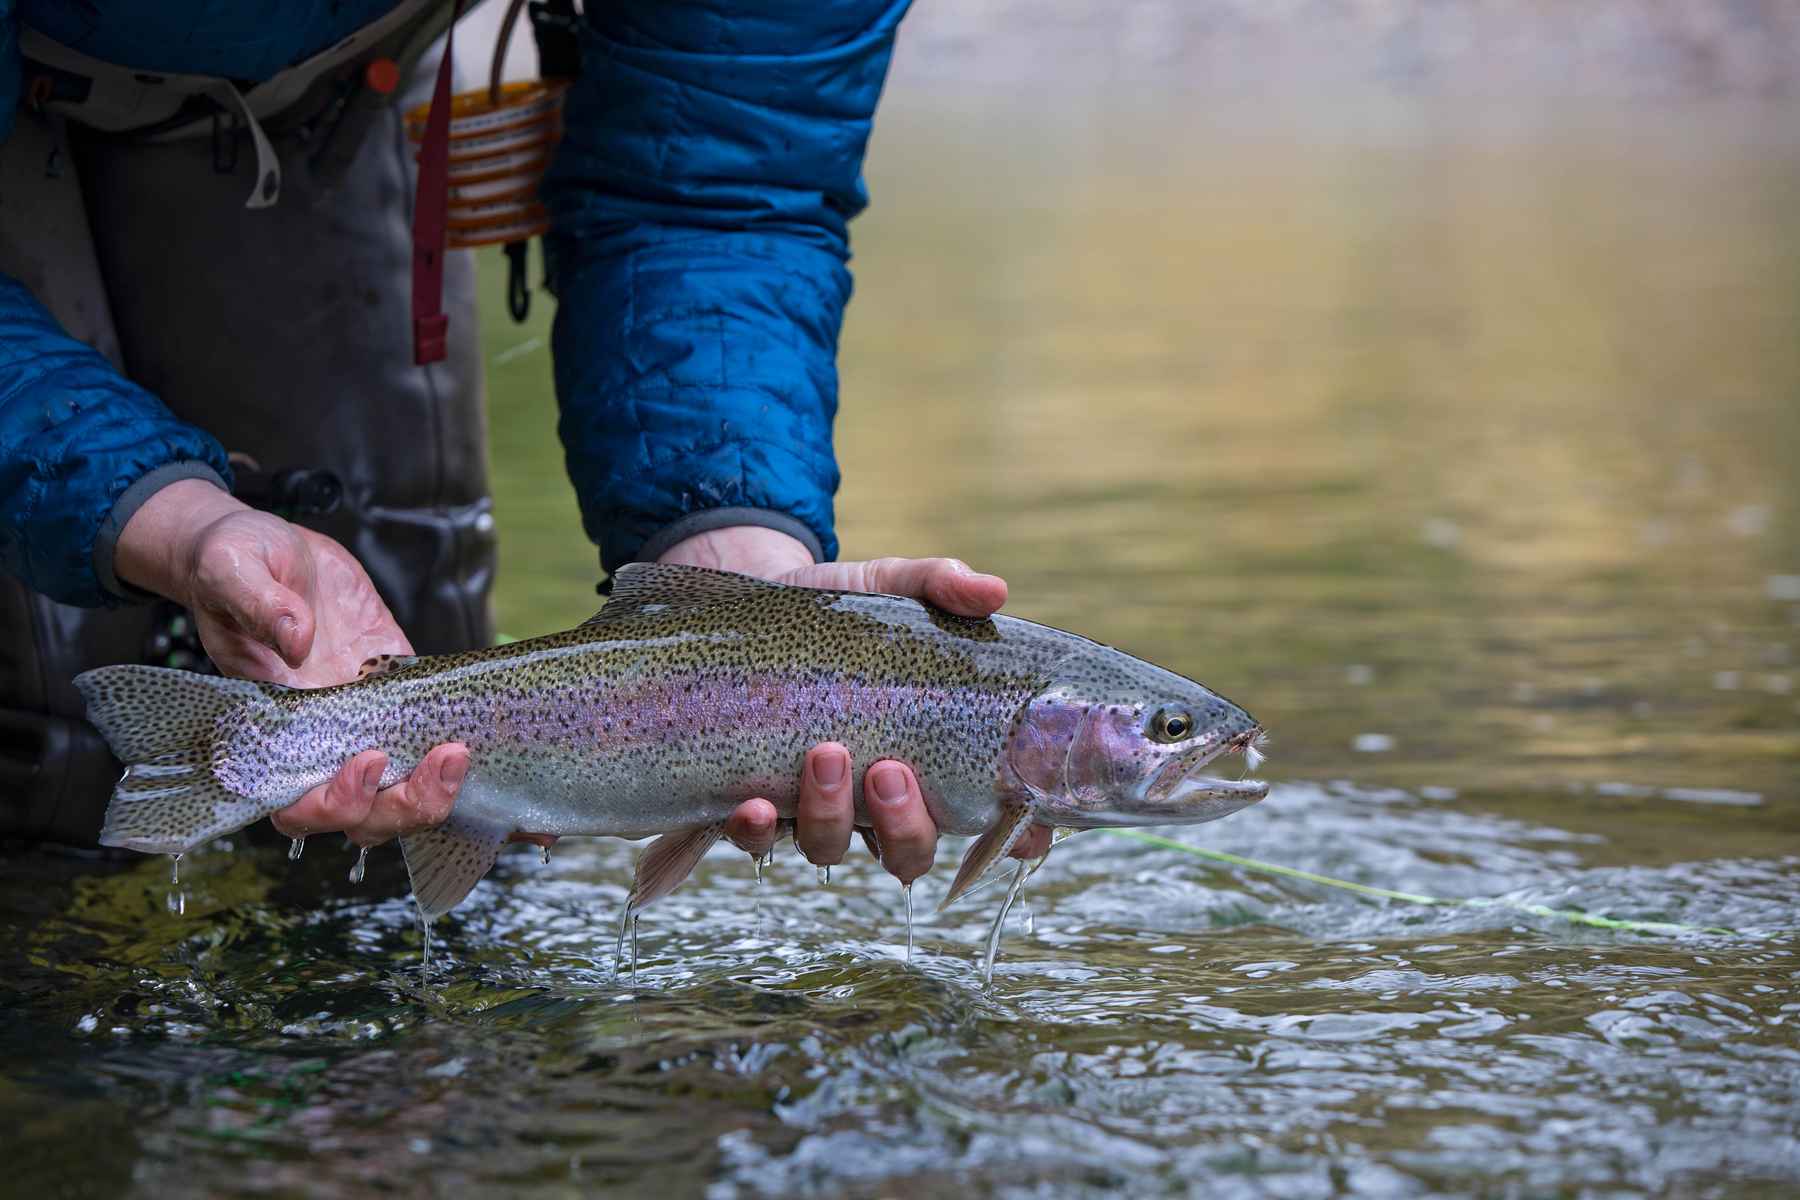 http://www.hatchmag.com/sites/default/files/styles/extra-large/public/field/image/_L5A7054.jpg